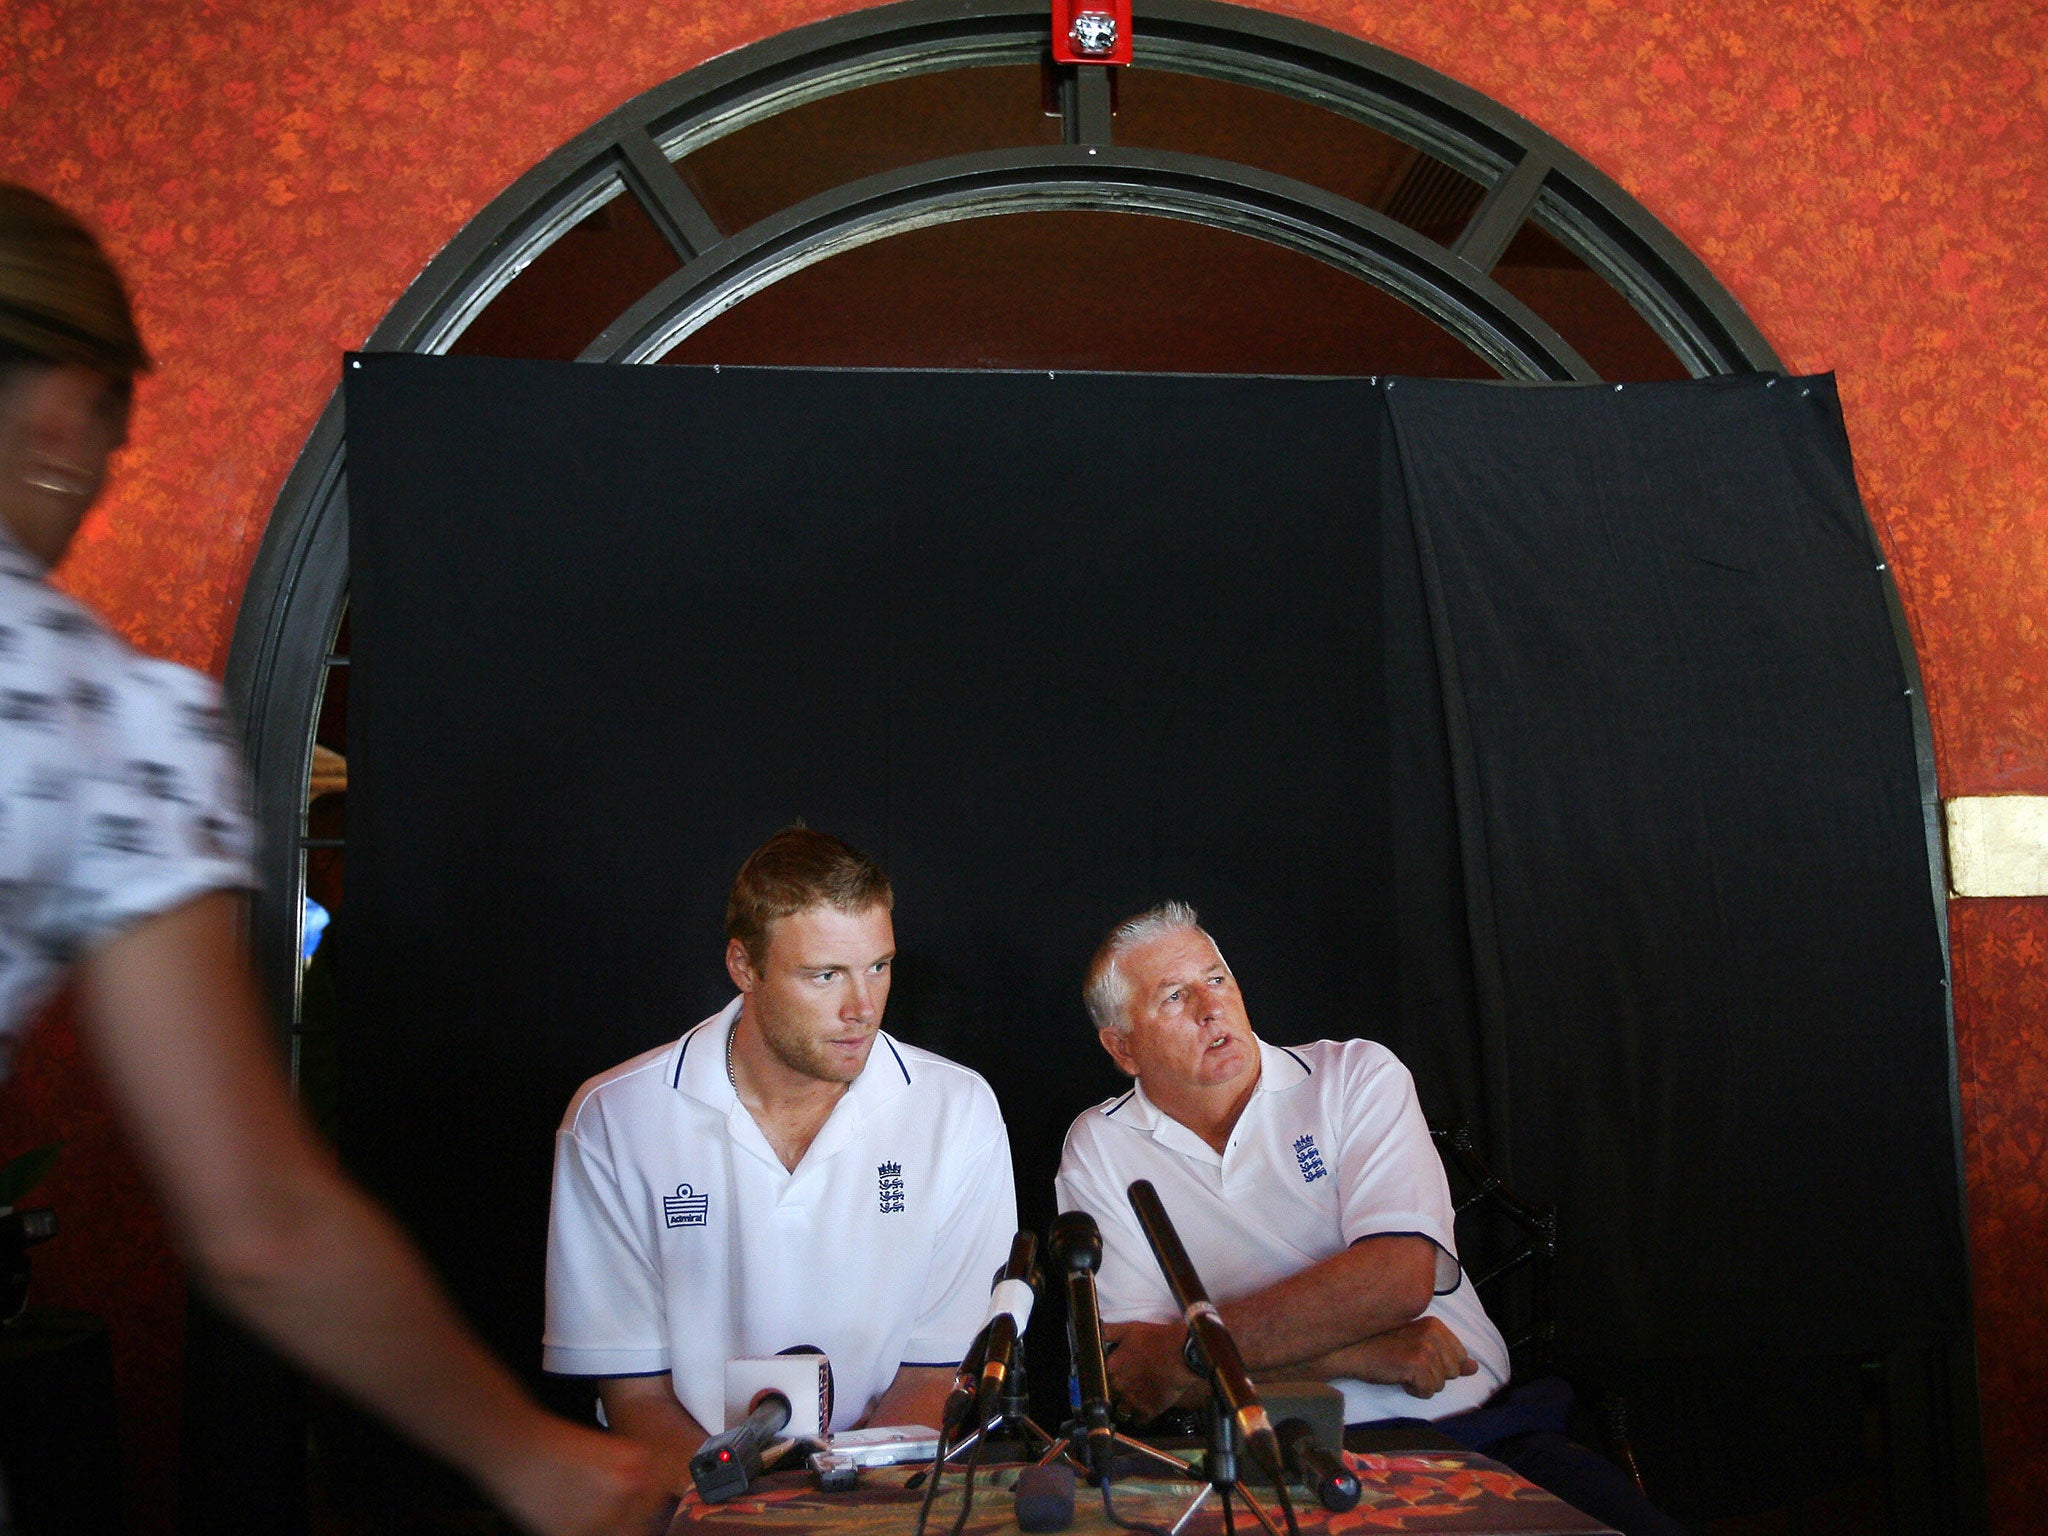 Andrew Flintoff faces the media in 2007 after the infamous pedalo incident